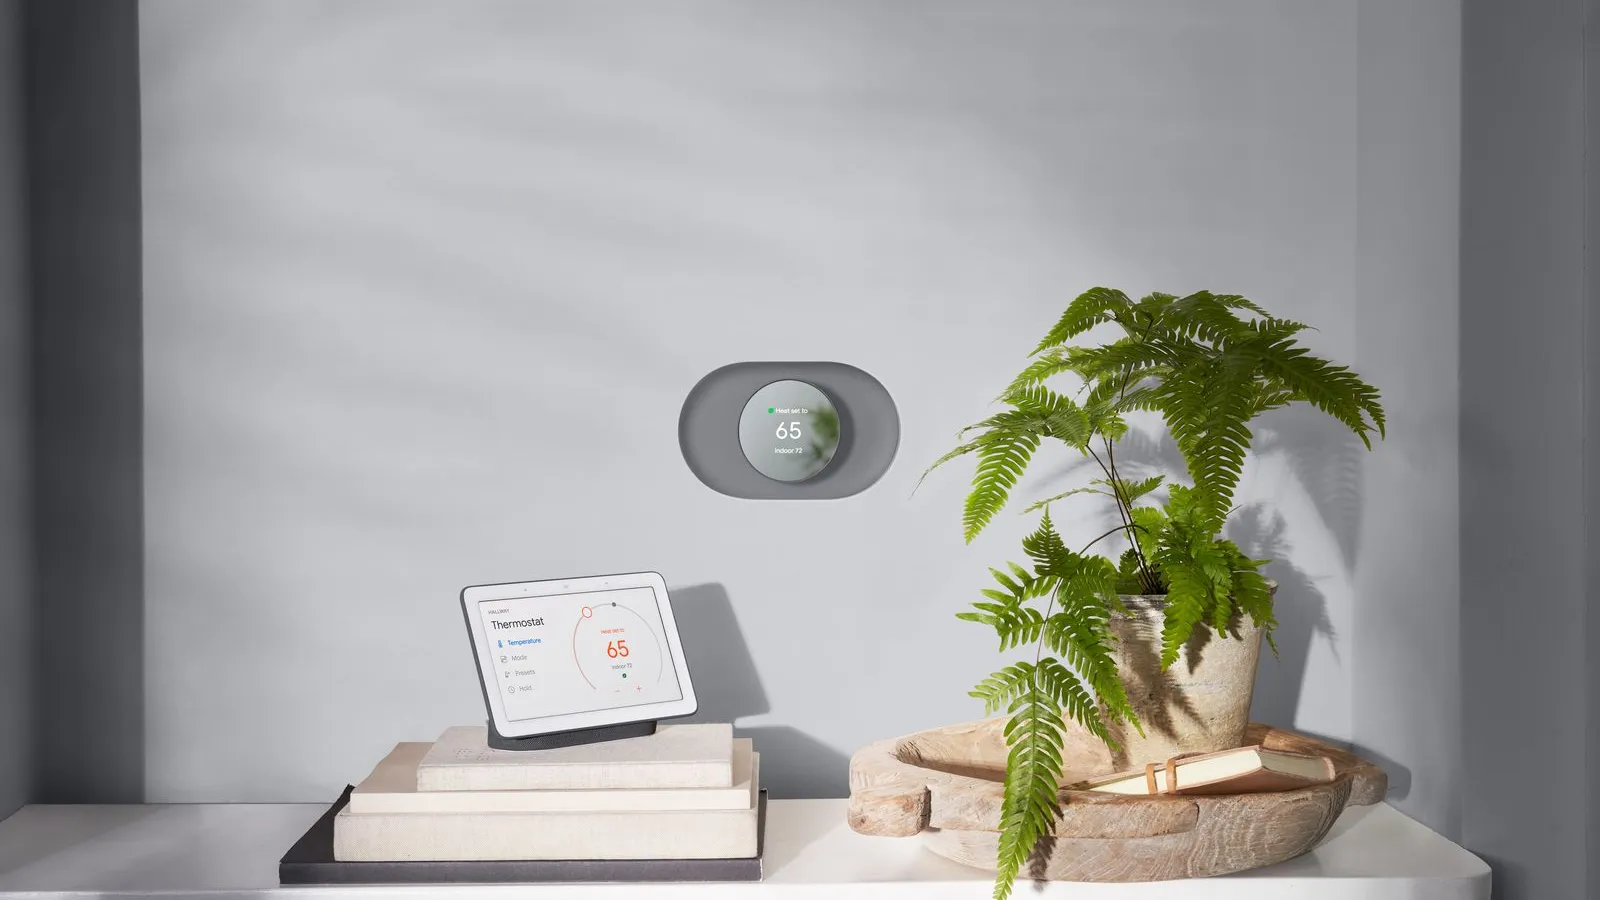 “Can Smart Home Technology Really Save Me Money?”